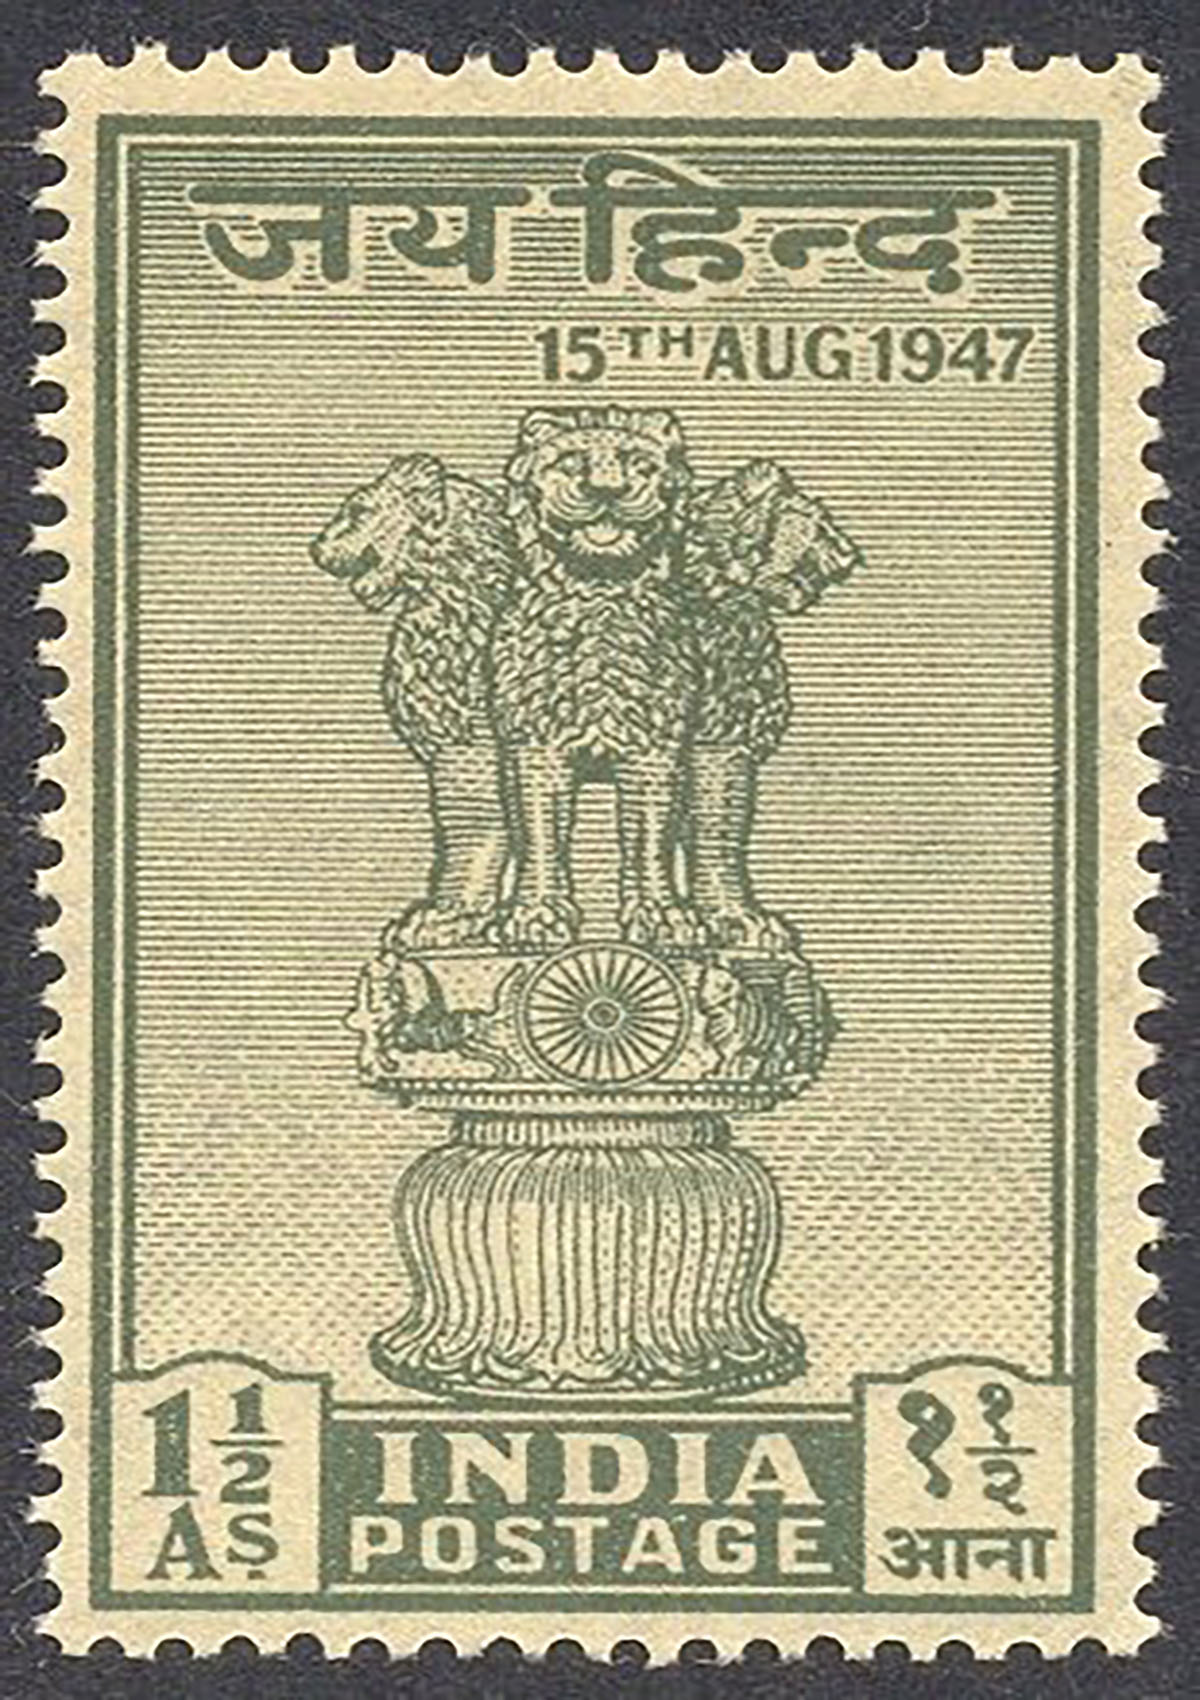 A 1.50-anna postal stamp depicting the Lion Capital of Ashoka. The stamp has Hindi text that reads “Jai Hind 15 Aug 1947.”